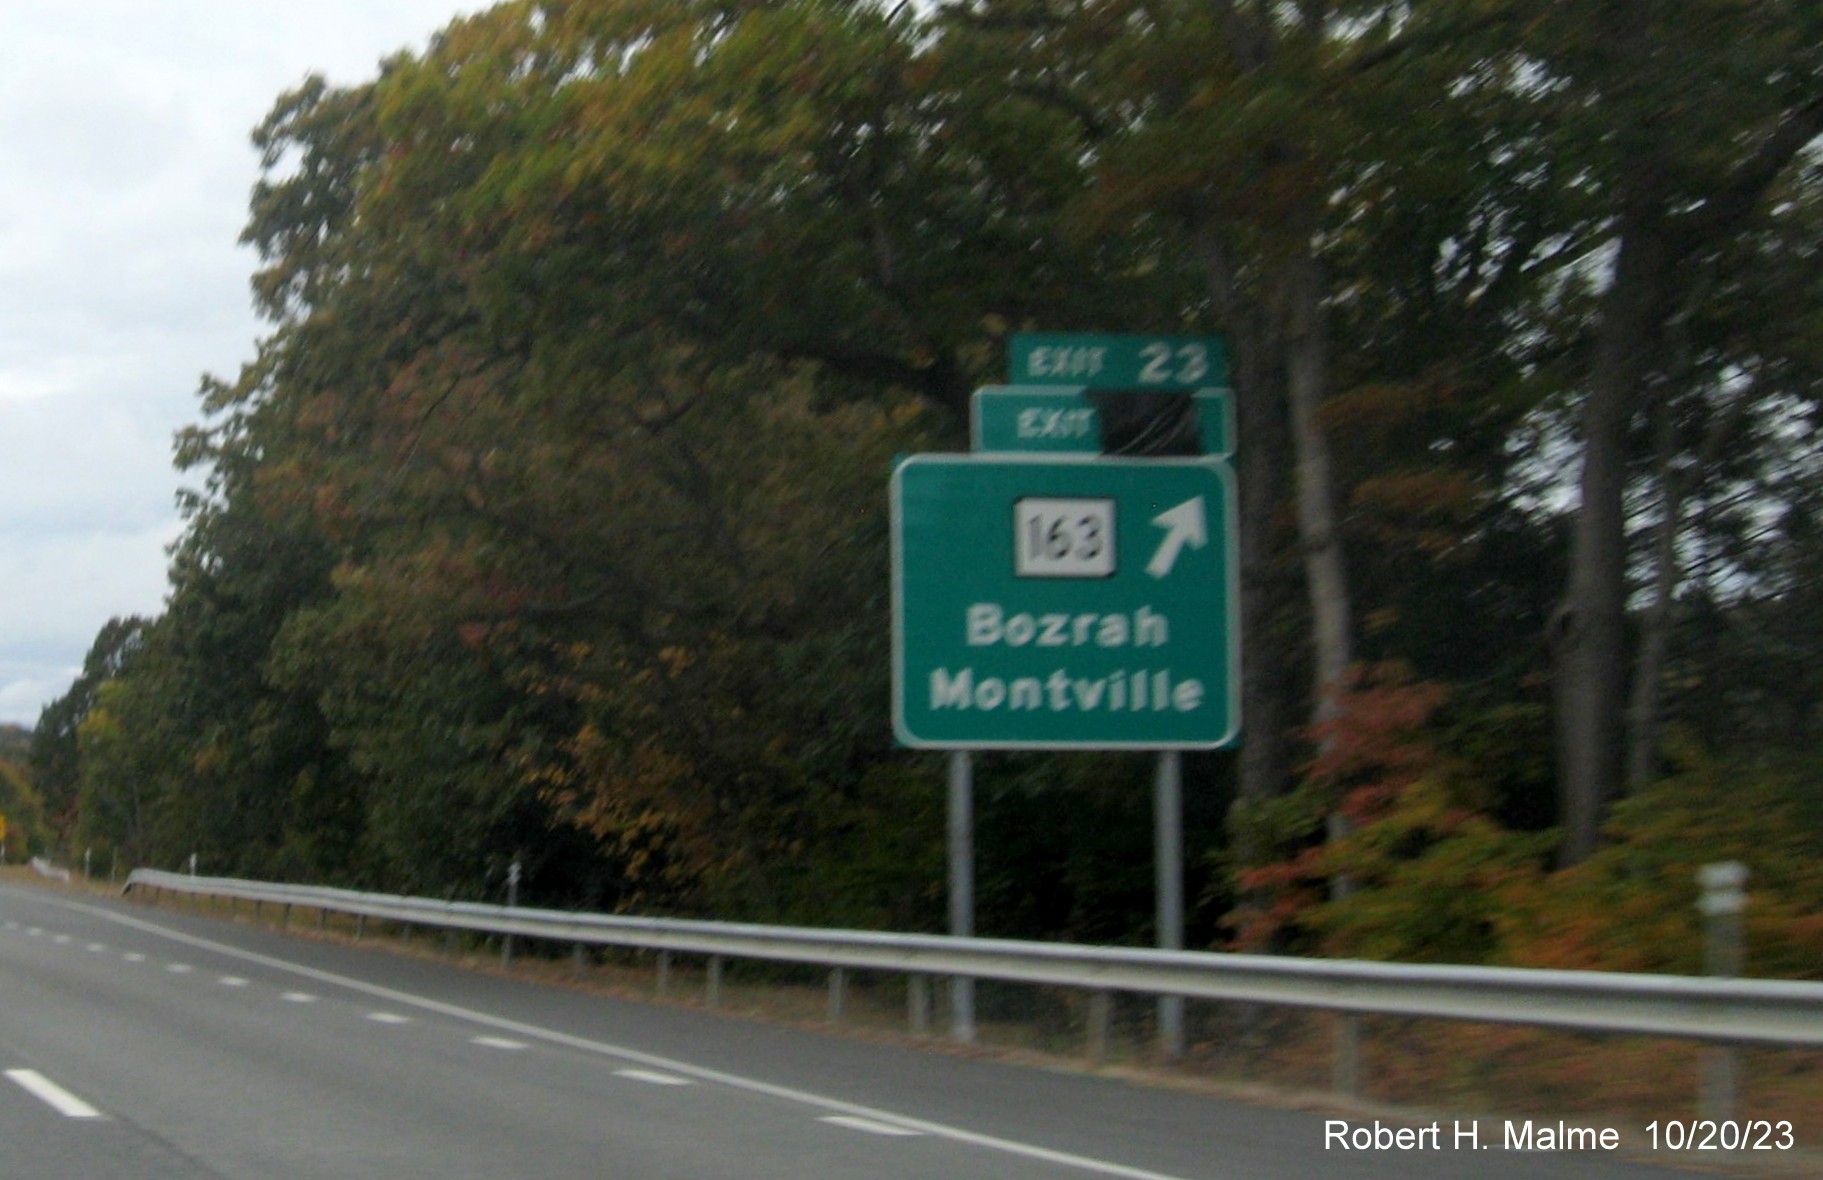 Image of new ground mounted ramp sign for CT 163 exit on CT 2 West in Bazrah with covered 
      over future exit number, October 2023